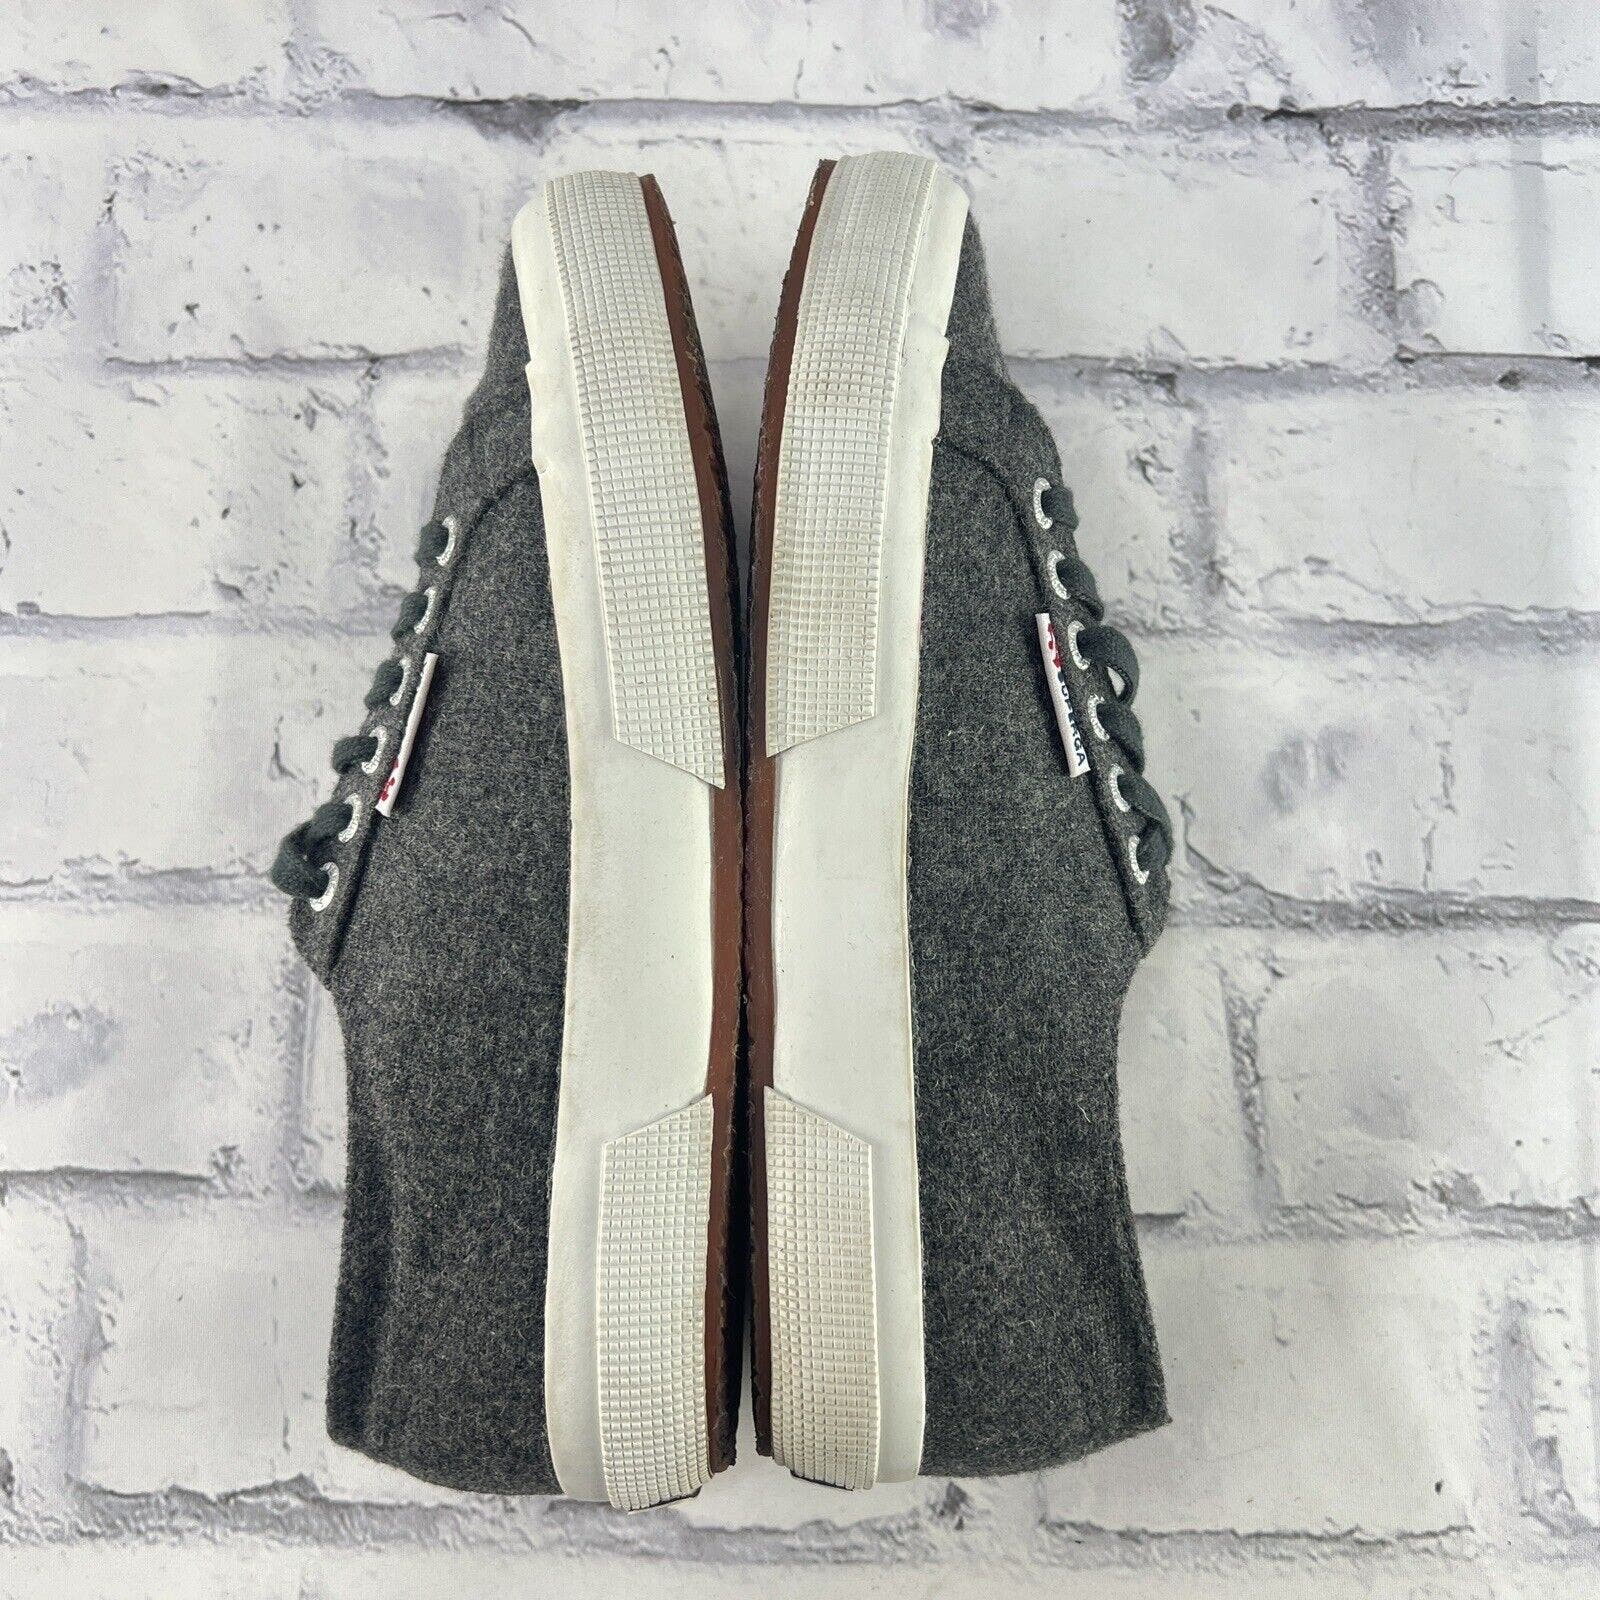 Superga Wool Sneakers Women's 39 (US 8) Gray Lace Up Low Top Casual Shoe